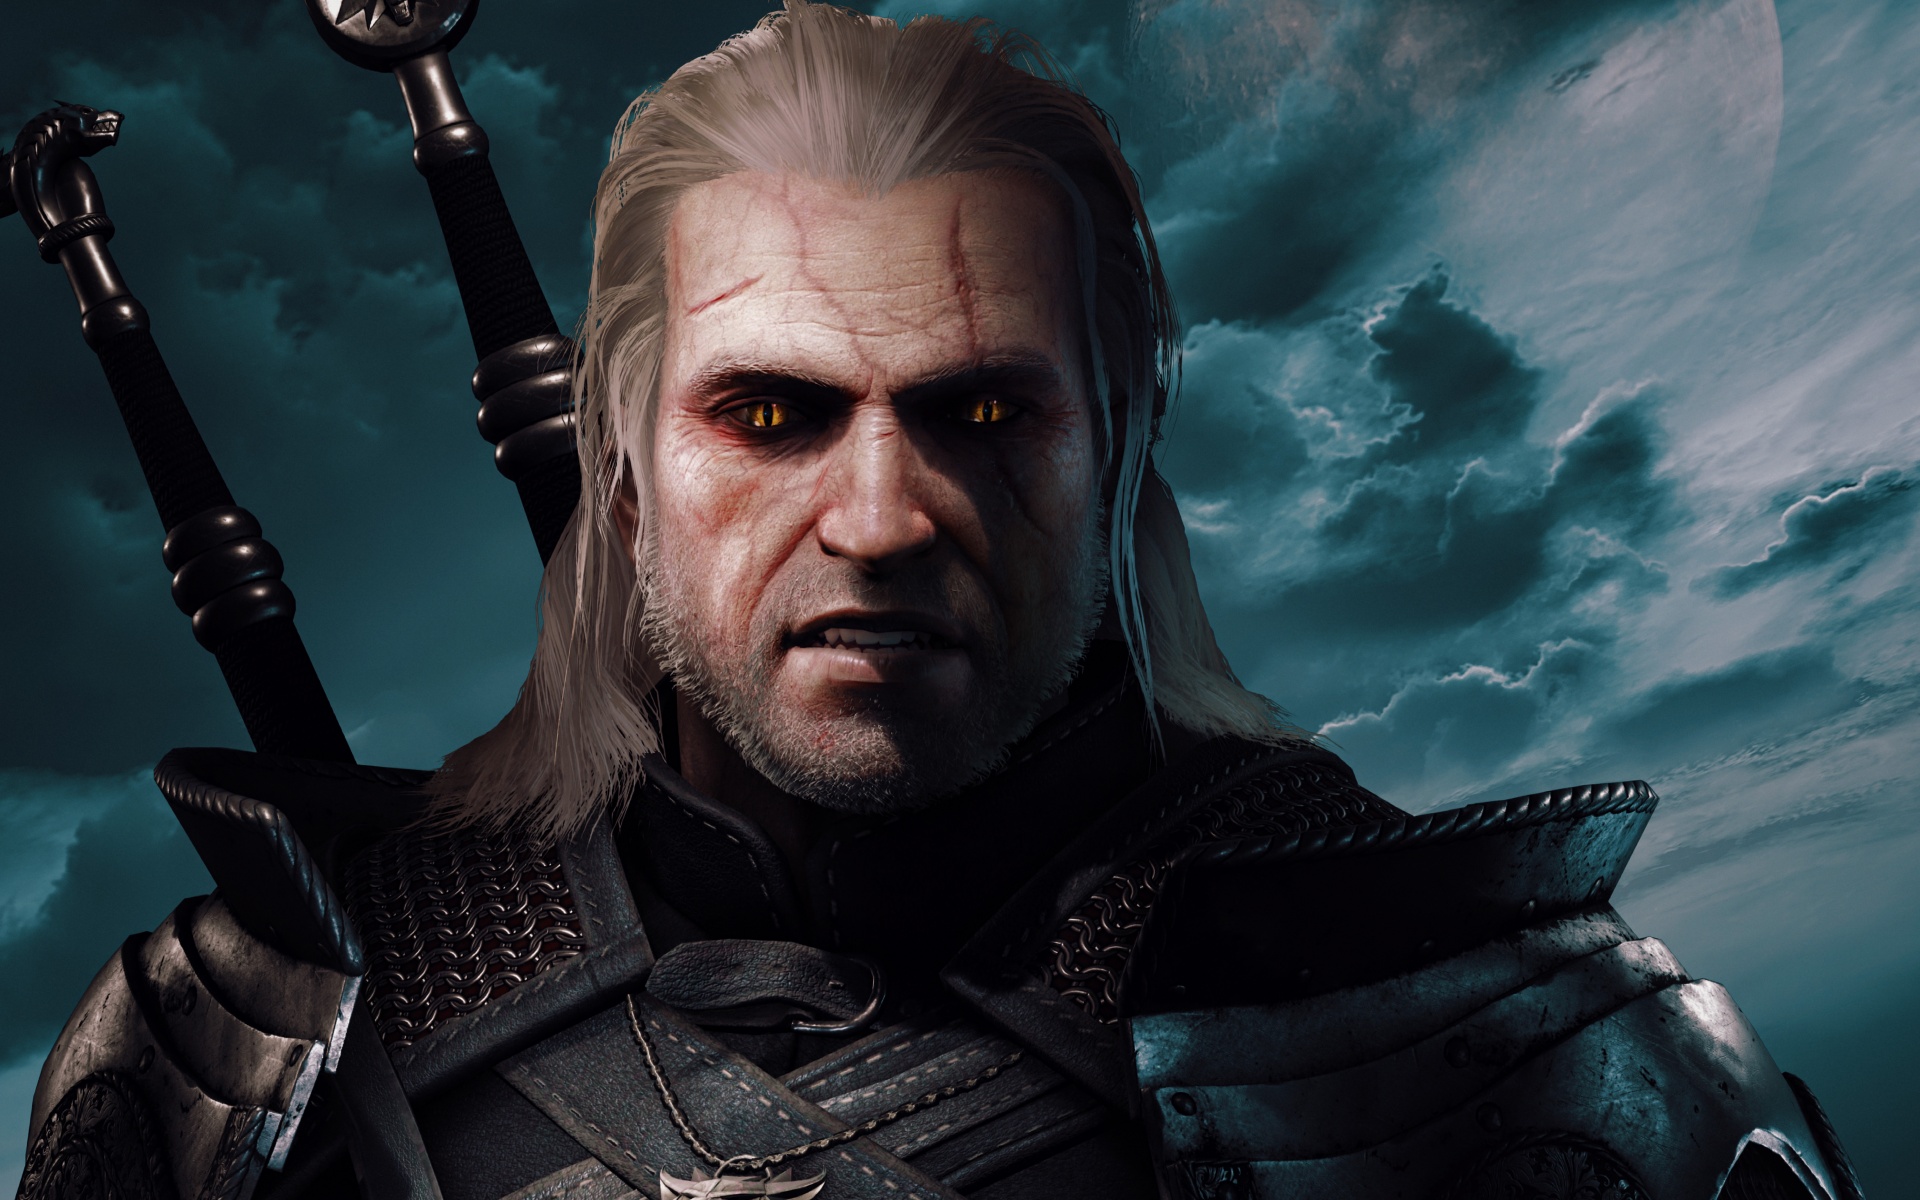 The Witcher Wallpaper 81 pictures